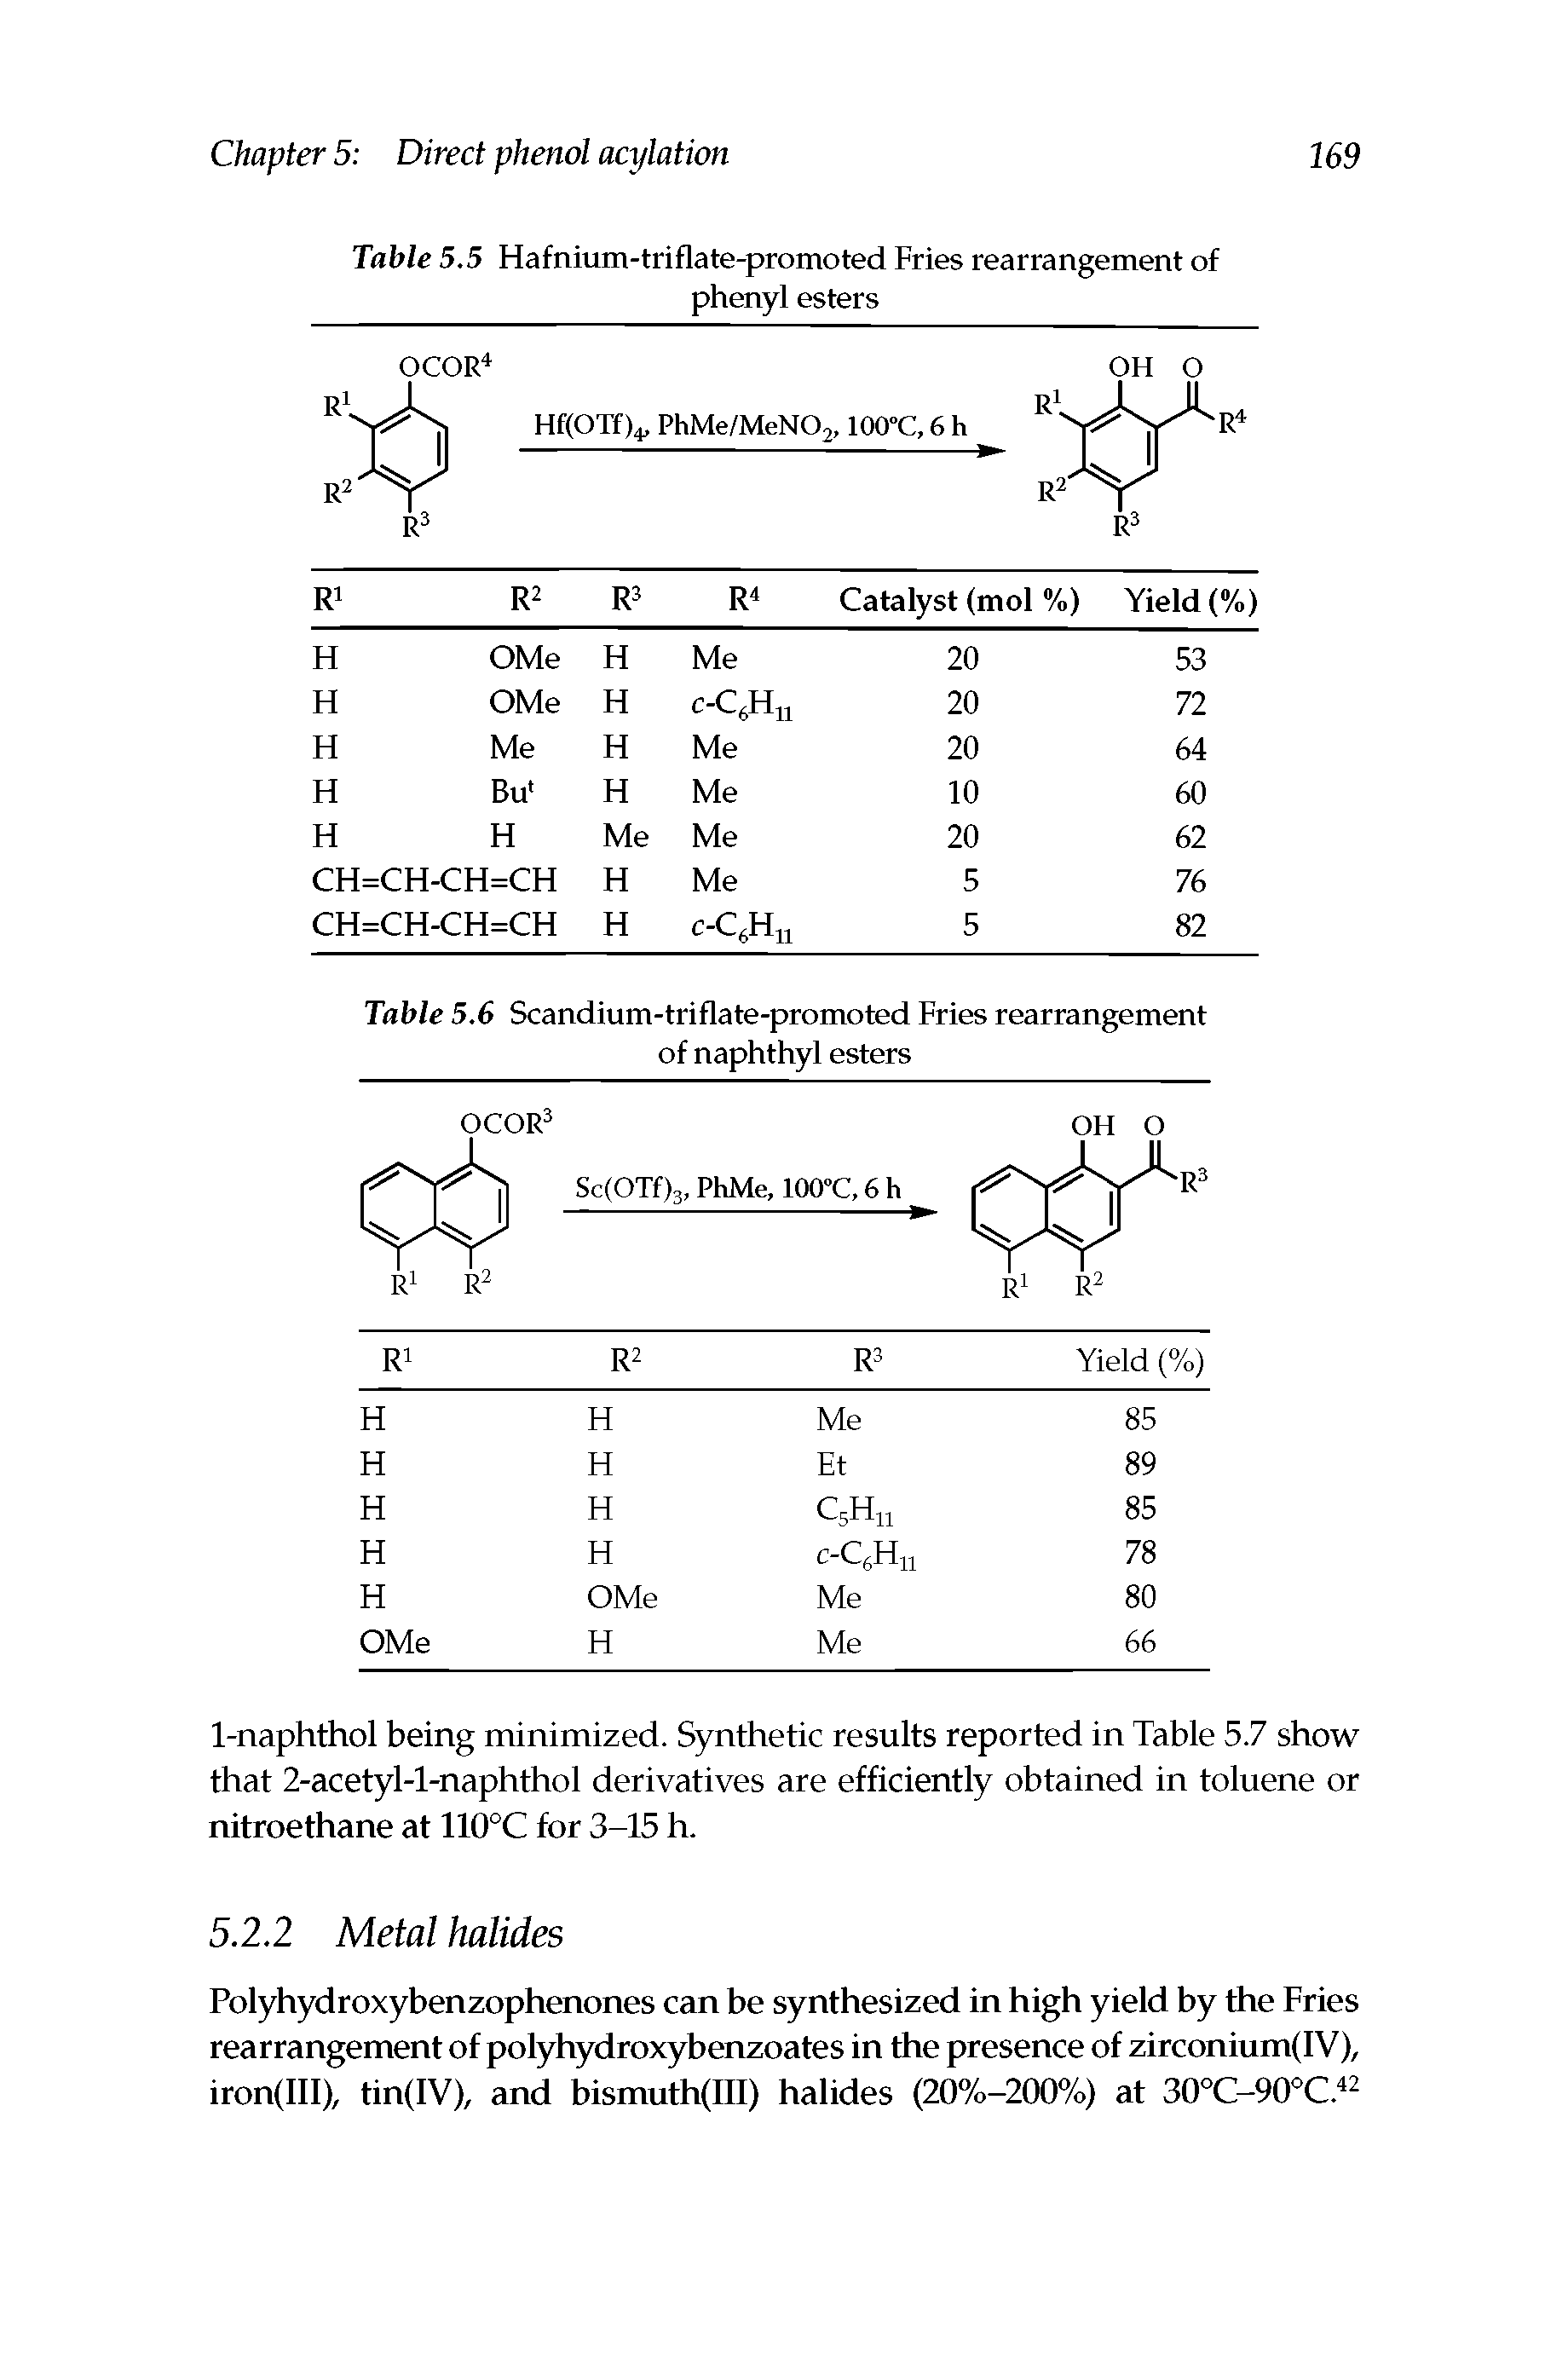 Table 5.5 Hafnium-triflate-promoted Fries rearrangement of phenyl esters...